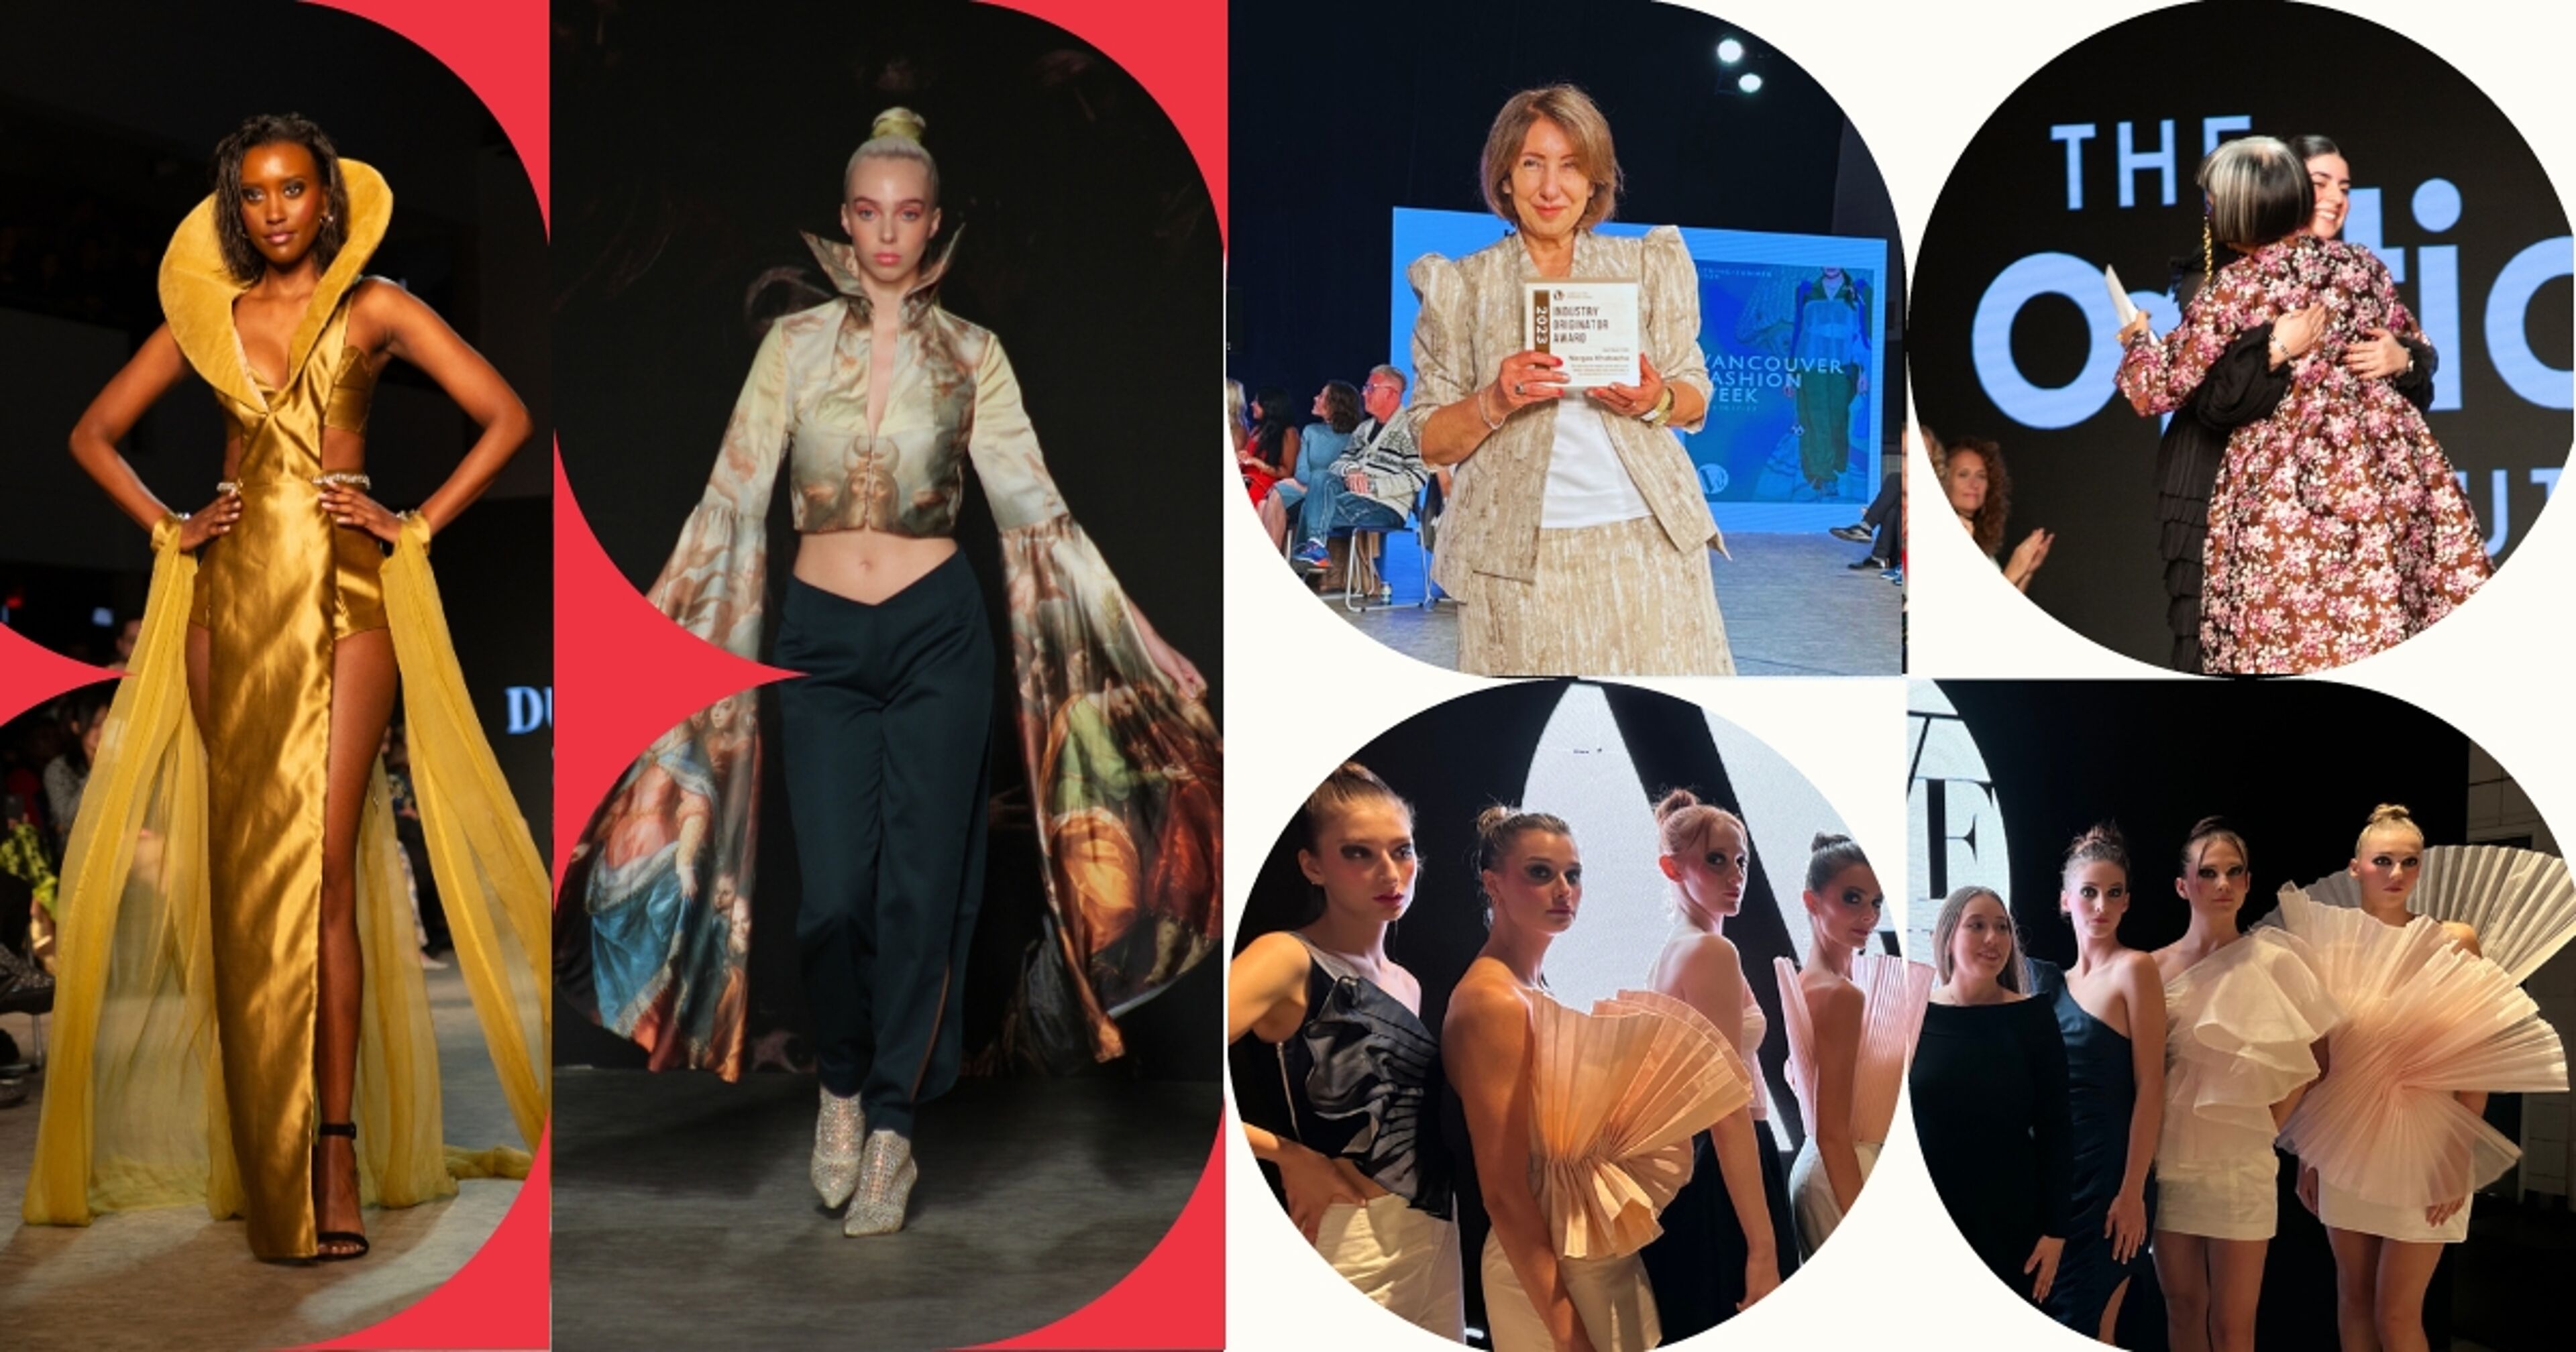 A collage showcasing the dynamic range of fashion design, from elegant to edgy, at a vibrant runway event.